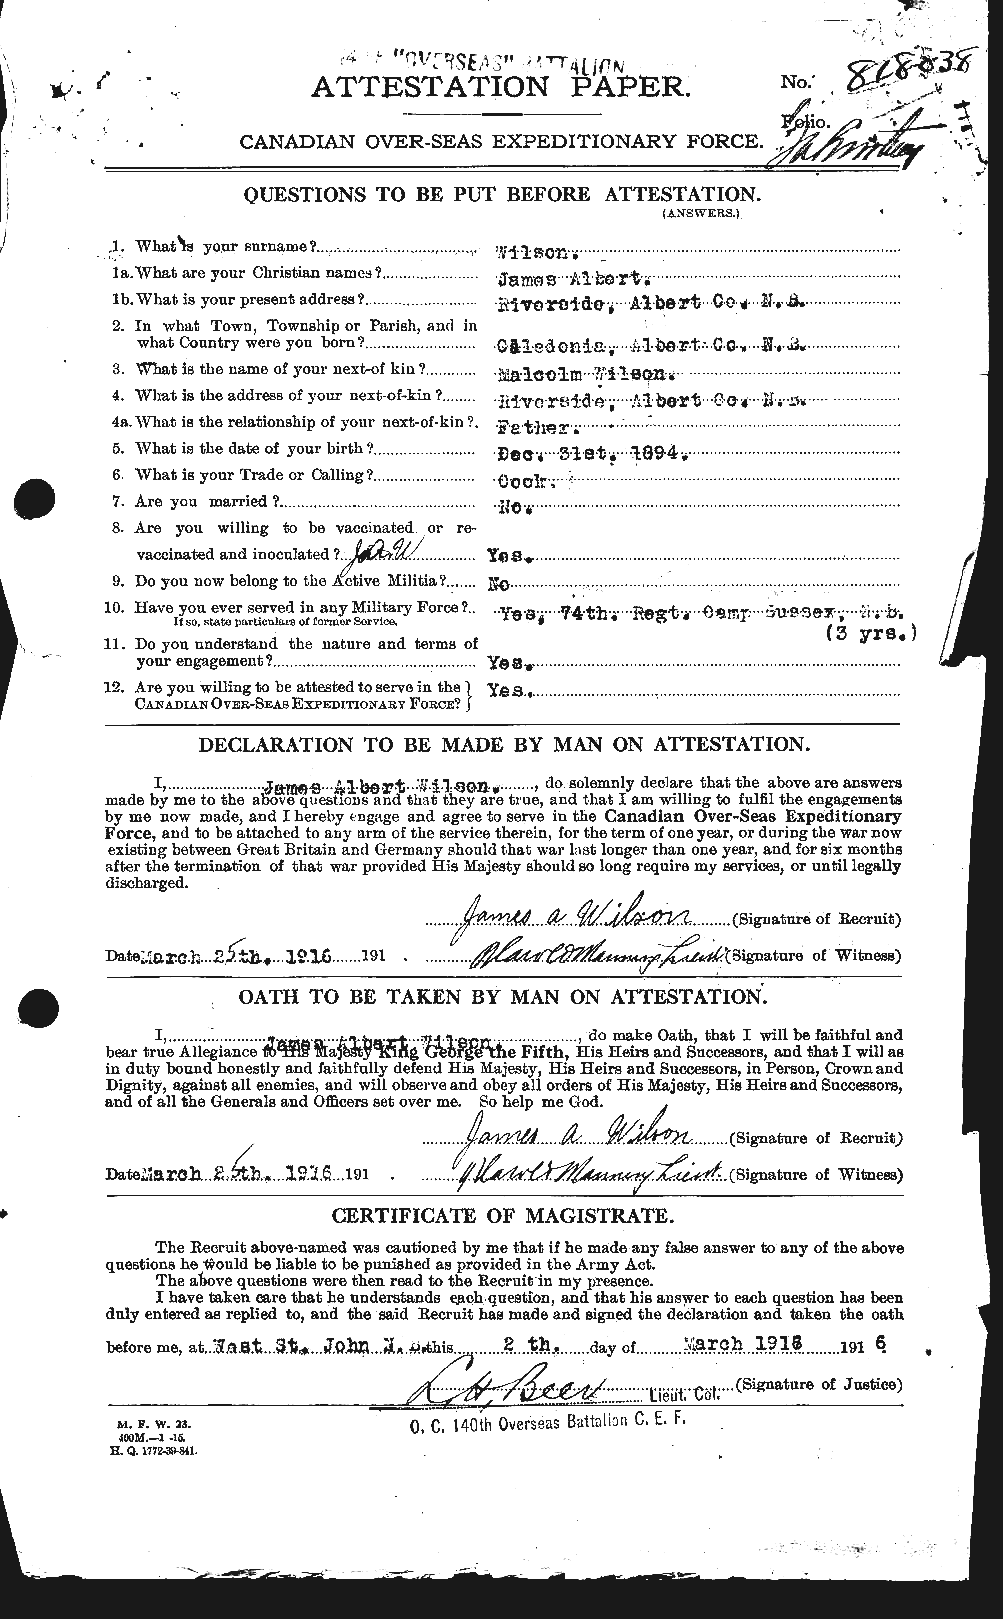 Personnel Records of the First World War - CEF 681410a